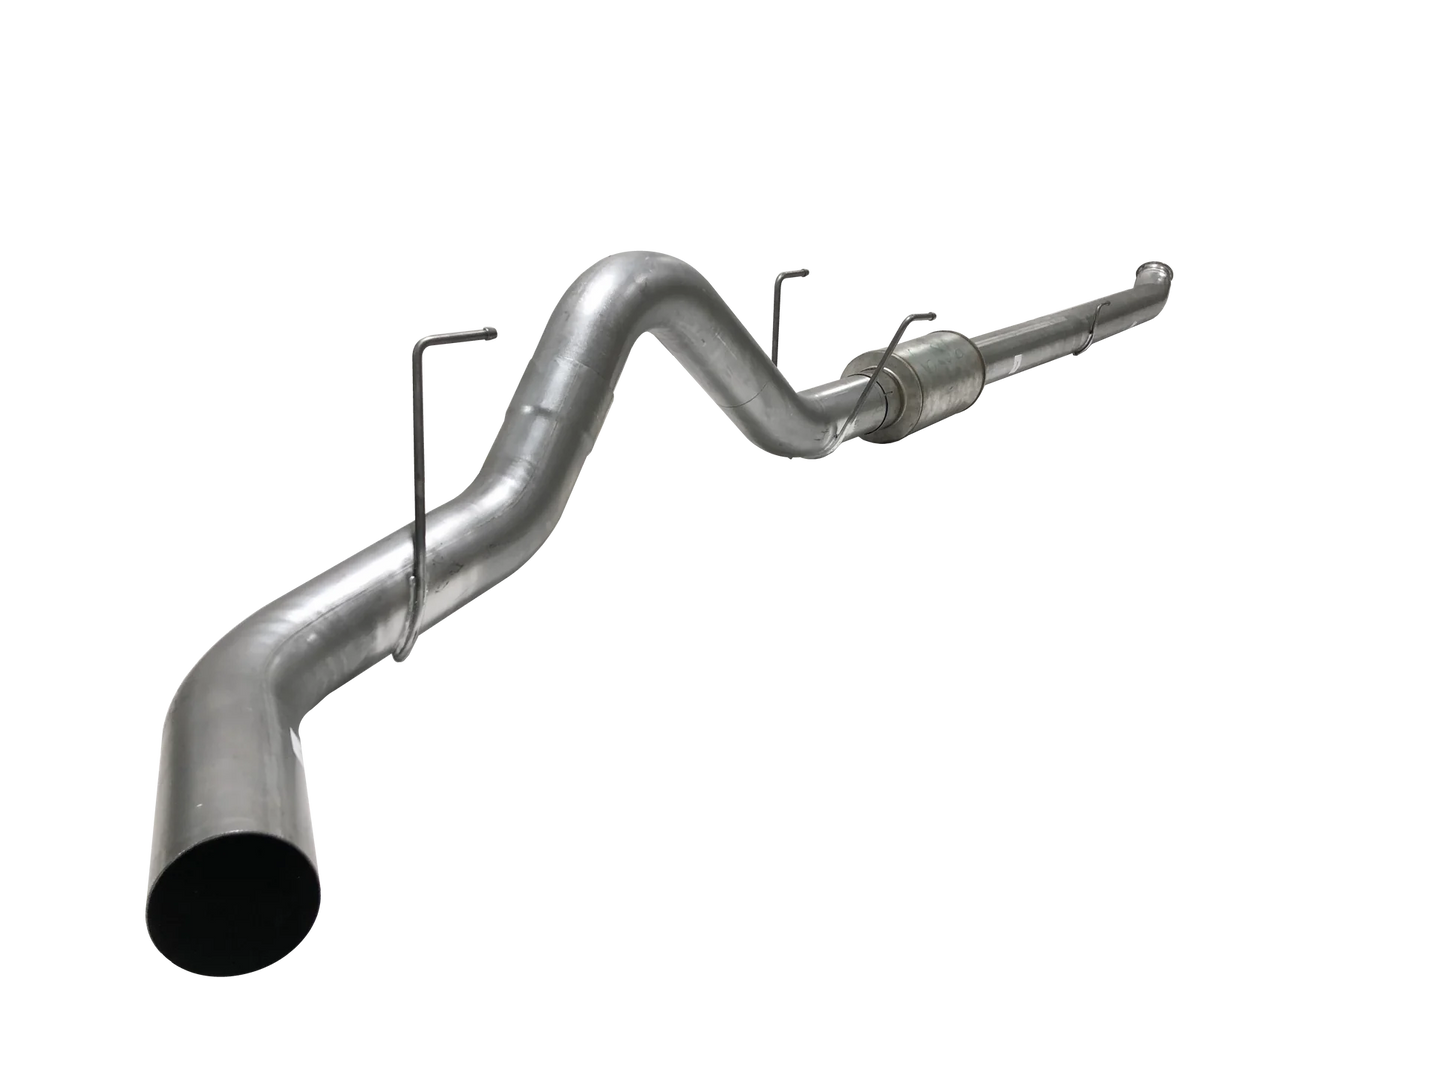 511017 511018 512014 512015 Mel's Manufacturing 5" Flex Pipe Back Single | 2019+ Ram 3500 6.7L Cummins  Mels Mfg FloPro Flo-Pro Flo Pro Hell On Wheels Performance Ltd Limited Canadian Owned and Operated Online Diesel Parts Distribution & Wholesale Supply Center in Alberta Canada Shipping Supplying to Alberta British Columbia Sask Saskatchewan Manitoba Ontario Quebec Newfoundland Labrador New Brunswick Nova Scotia Prince Edward Island AB BC SK MB ON QC PQ NS NB NFLD N.L. PEI